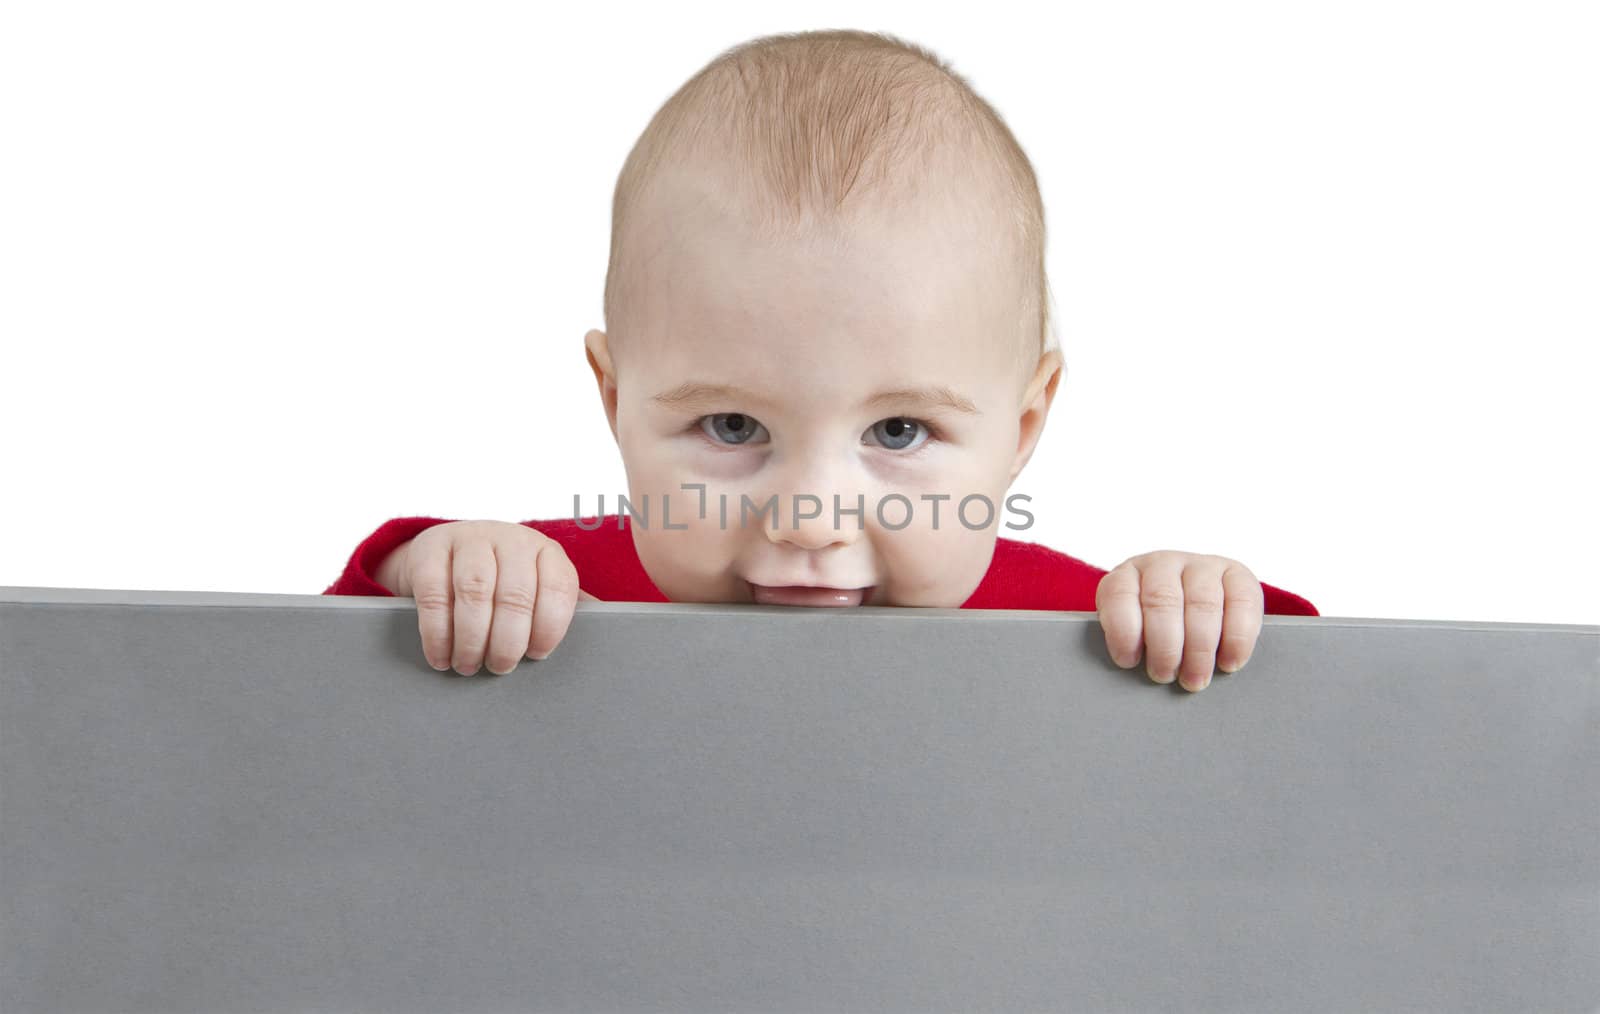 young child holding sign. isolate on white background